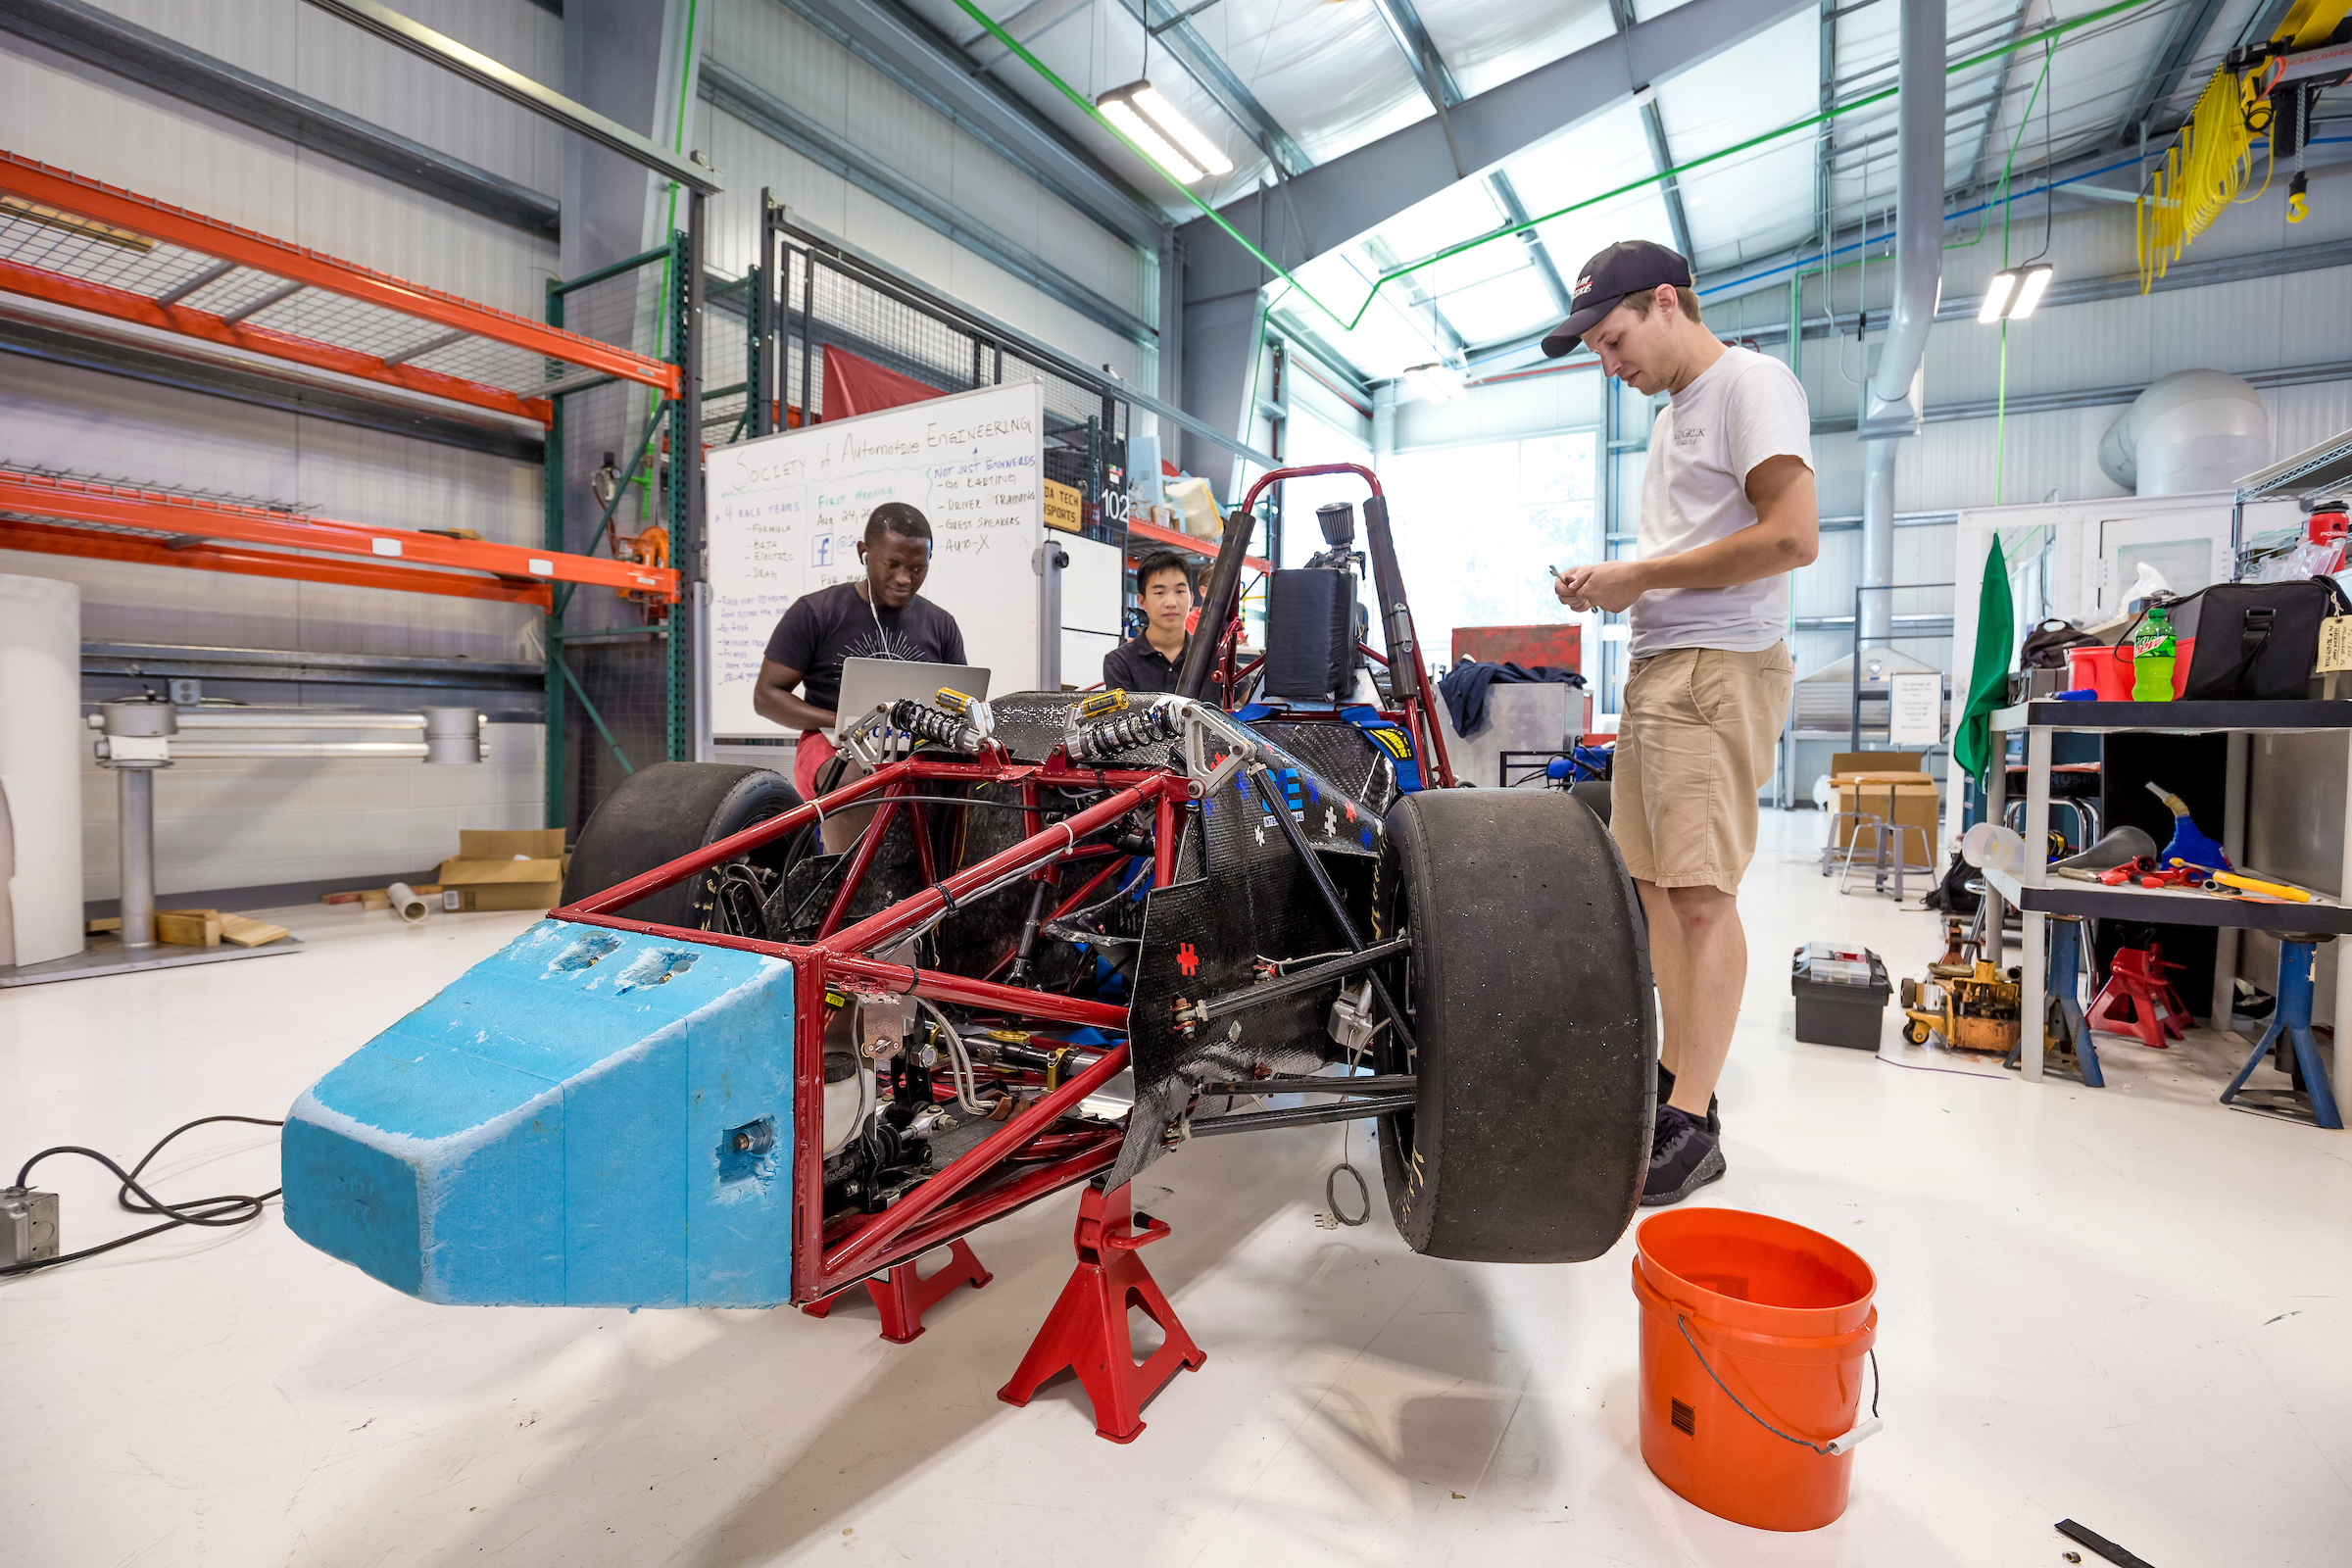 Photo of three students working on a vehicle in an automotive engineering workshop